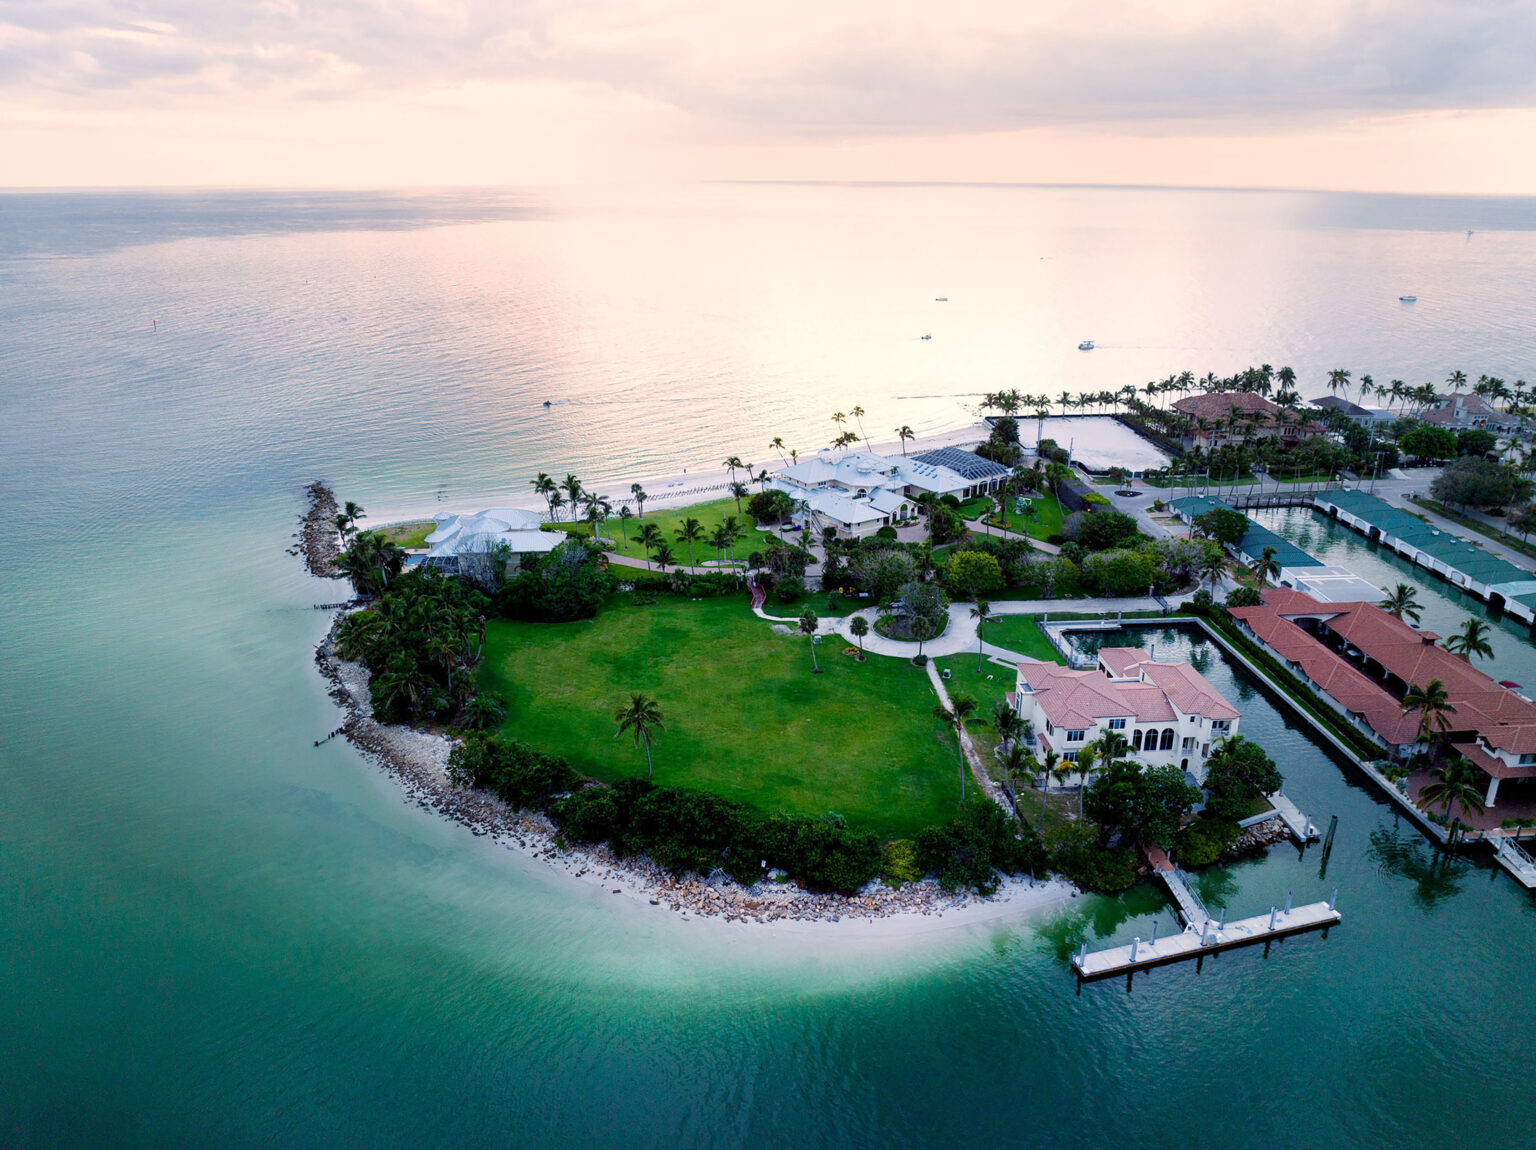 Florida's Gordon Pointe estate hits the market at a staggering $295 million, poised to set a world property price record. Explore the luxurious features and breathtaking views of this Naples gem.